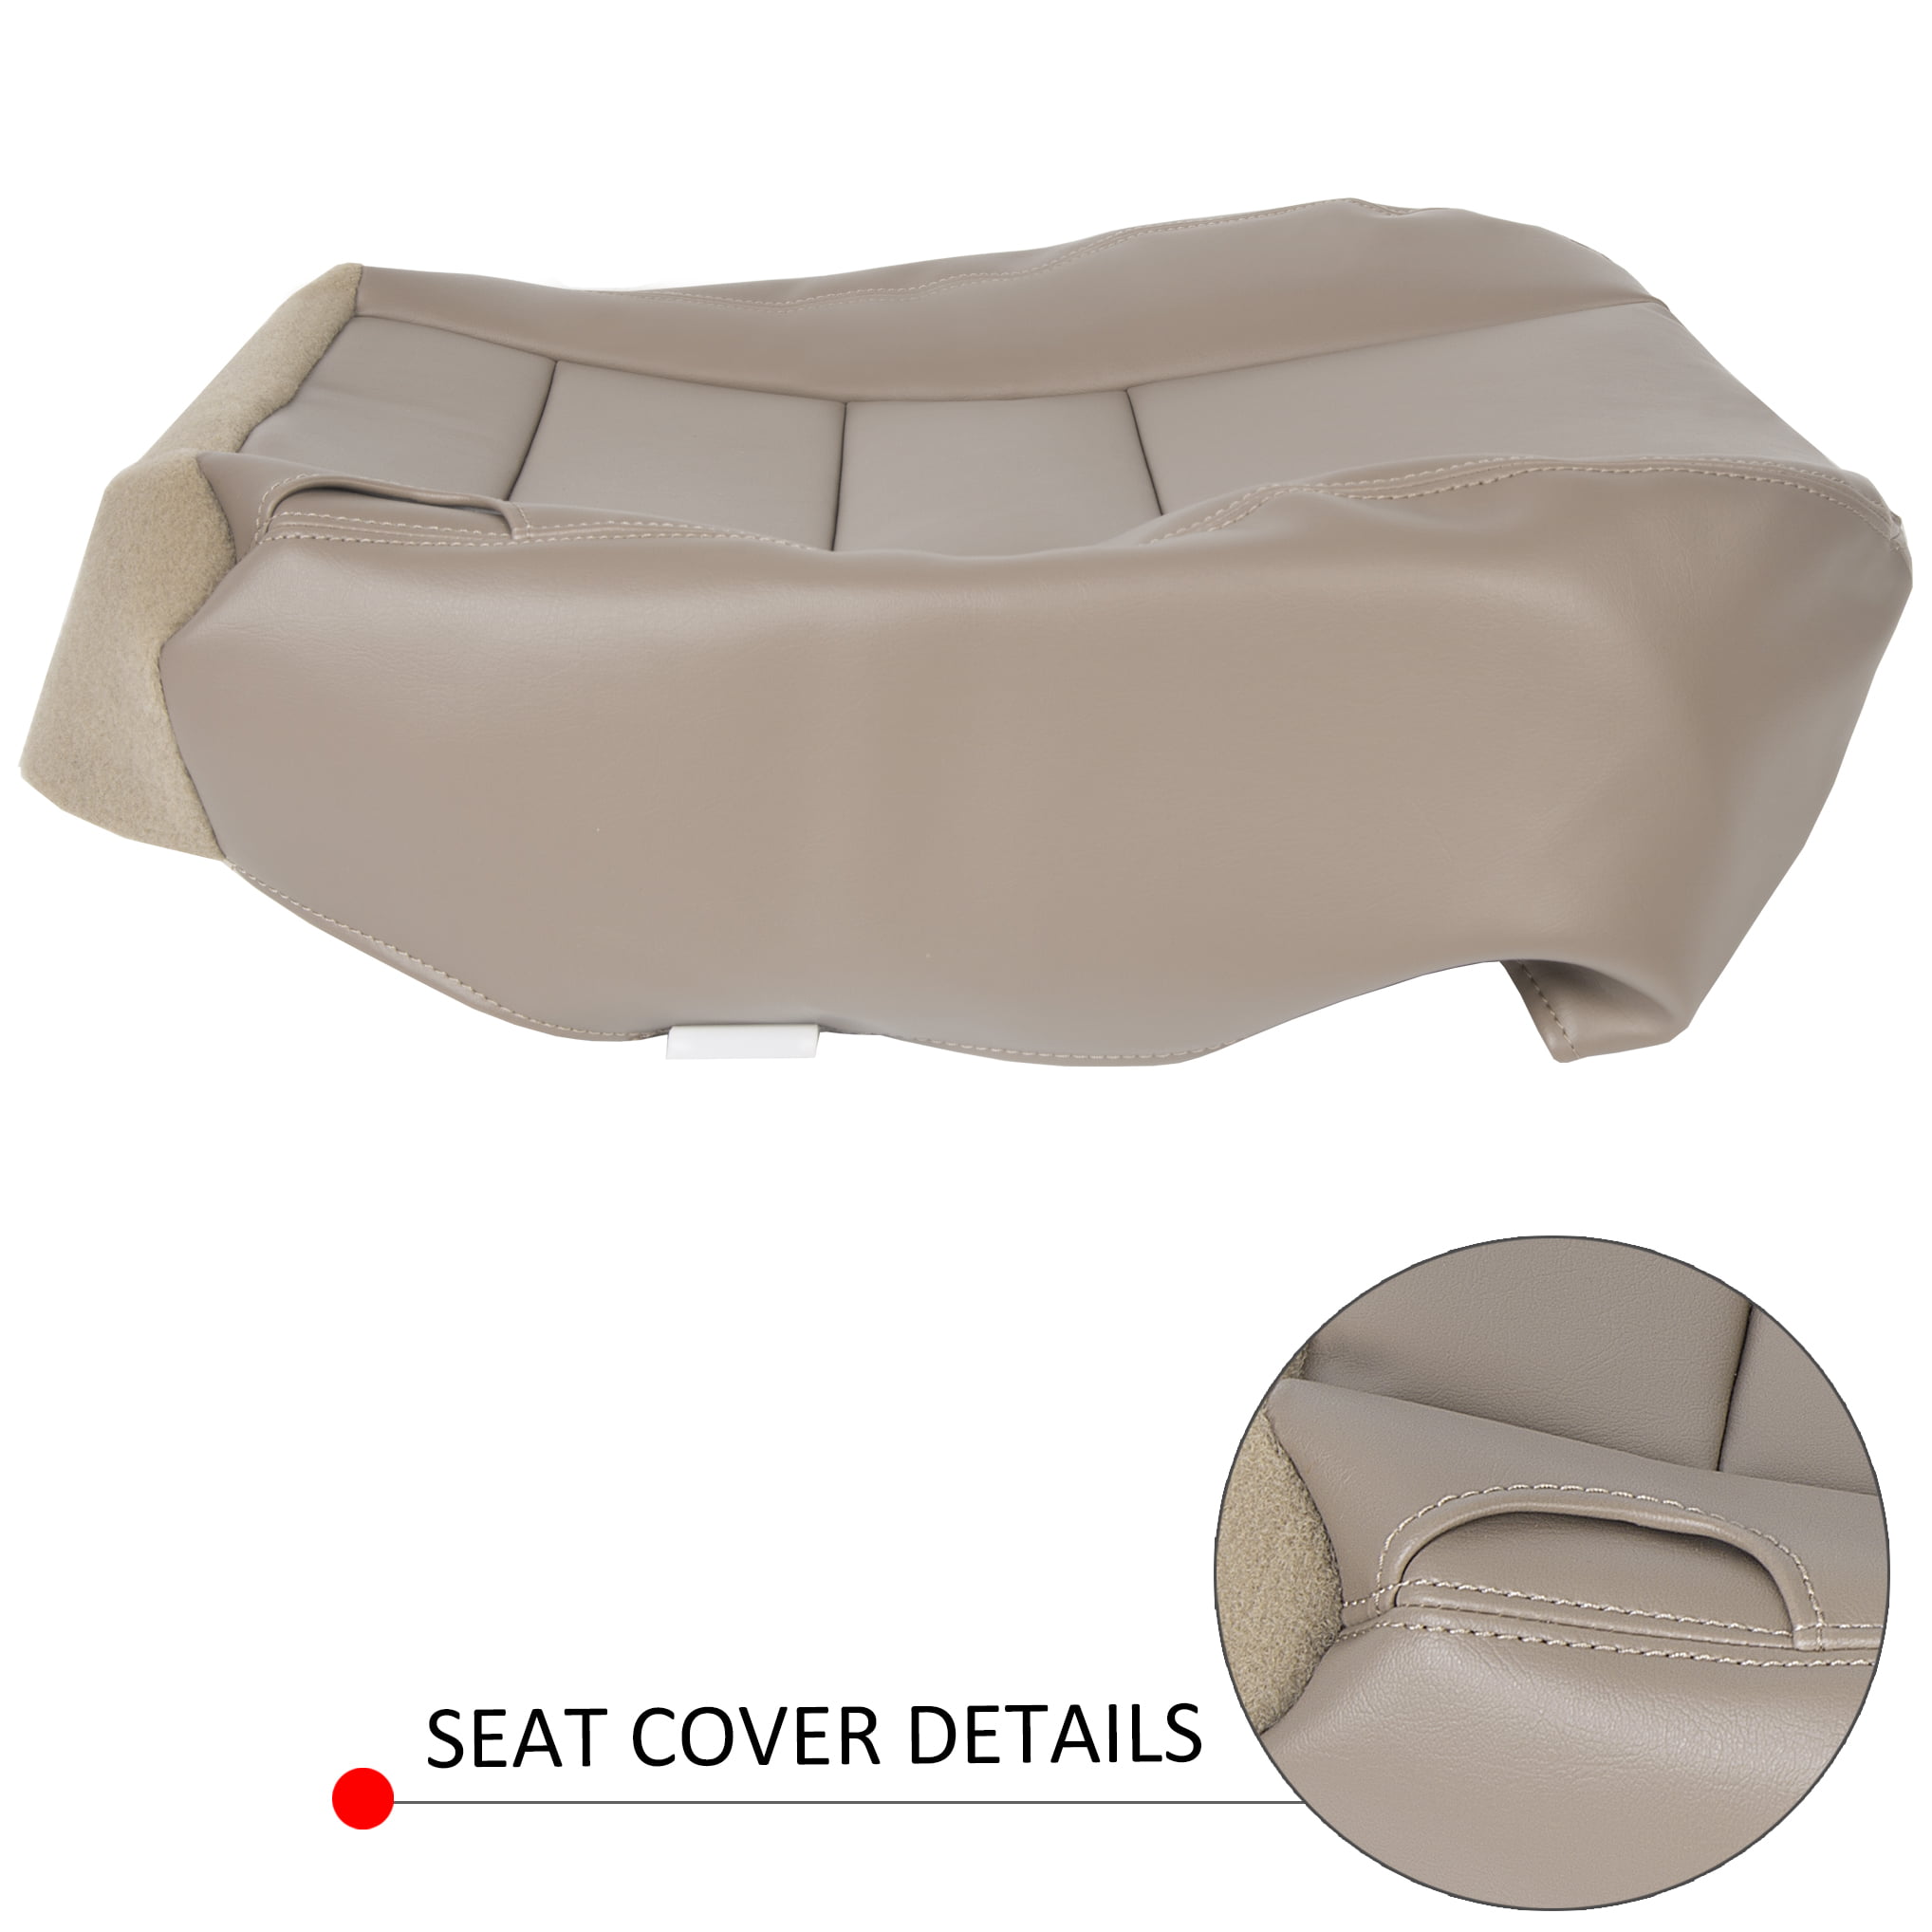 Have you heard of a seat cover with a hard bottom? Go get yours